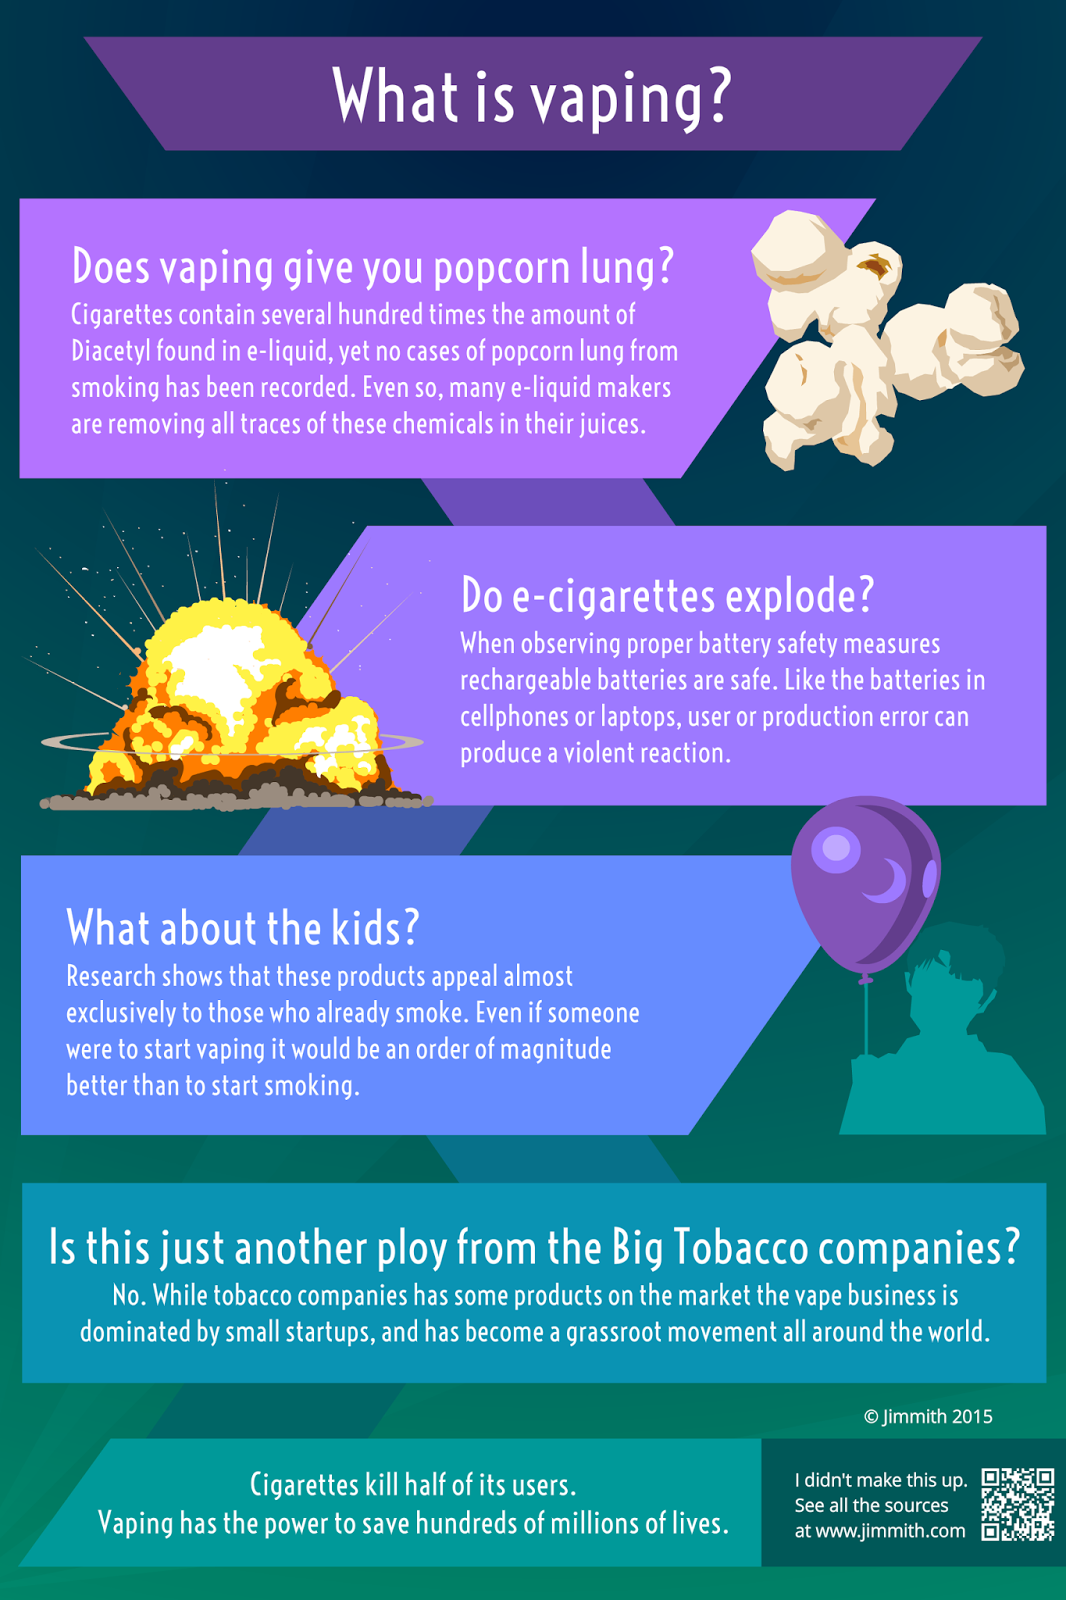 hypothesis about vaping